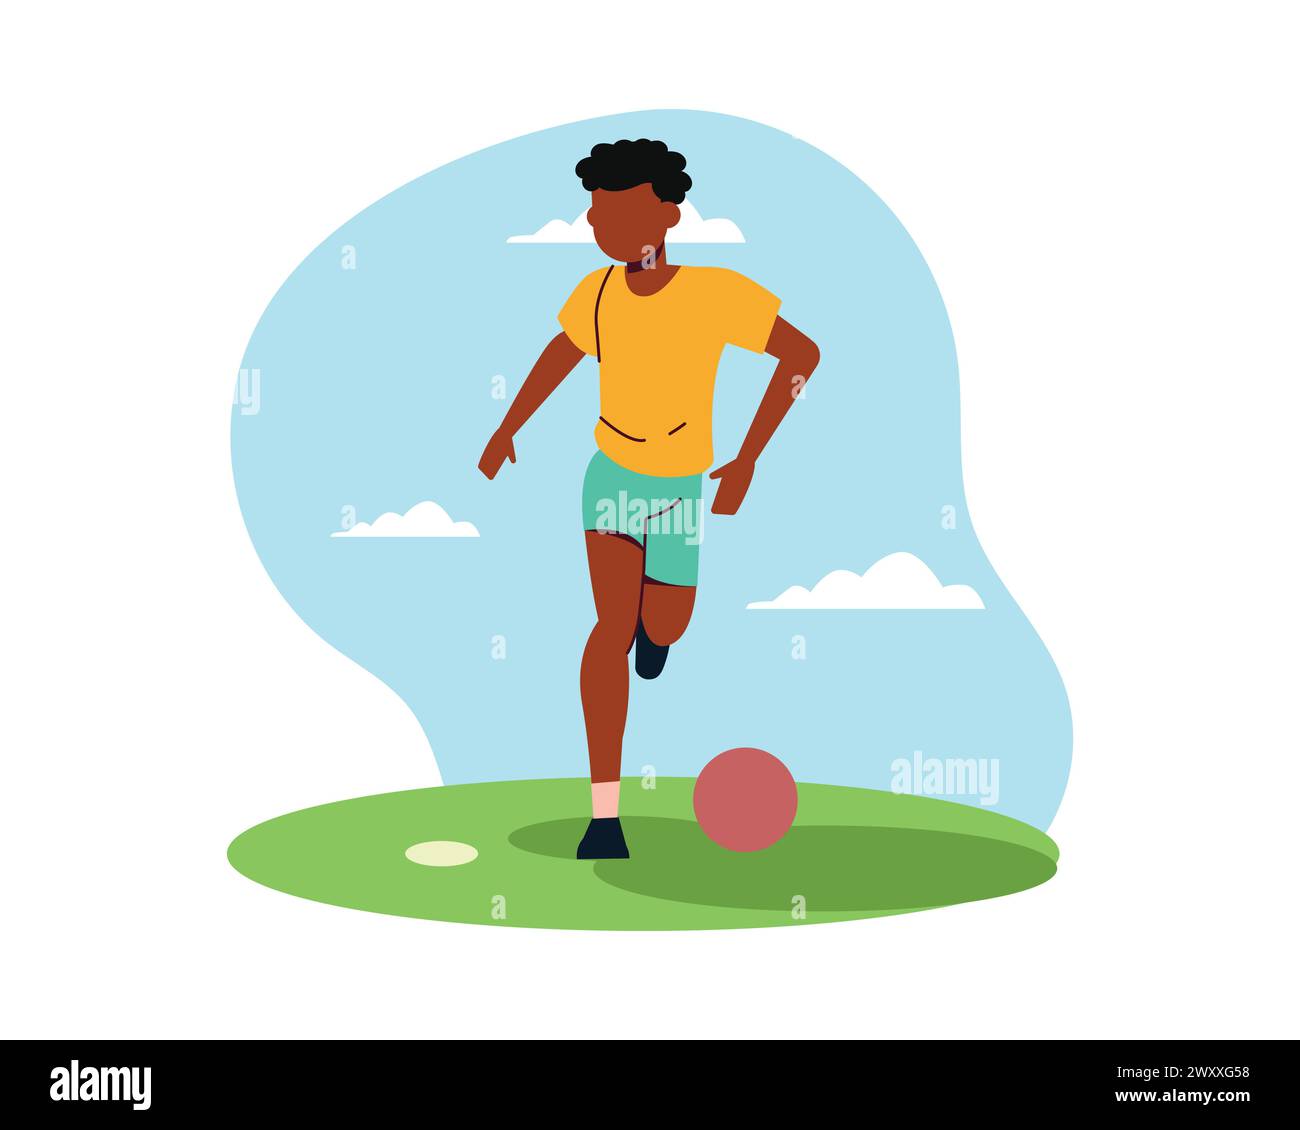 A football player dribbling a ball. Simple flat illustration for sport and leisure design vector. Active people for healthy life concept. Stock Vector